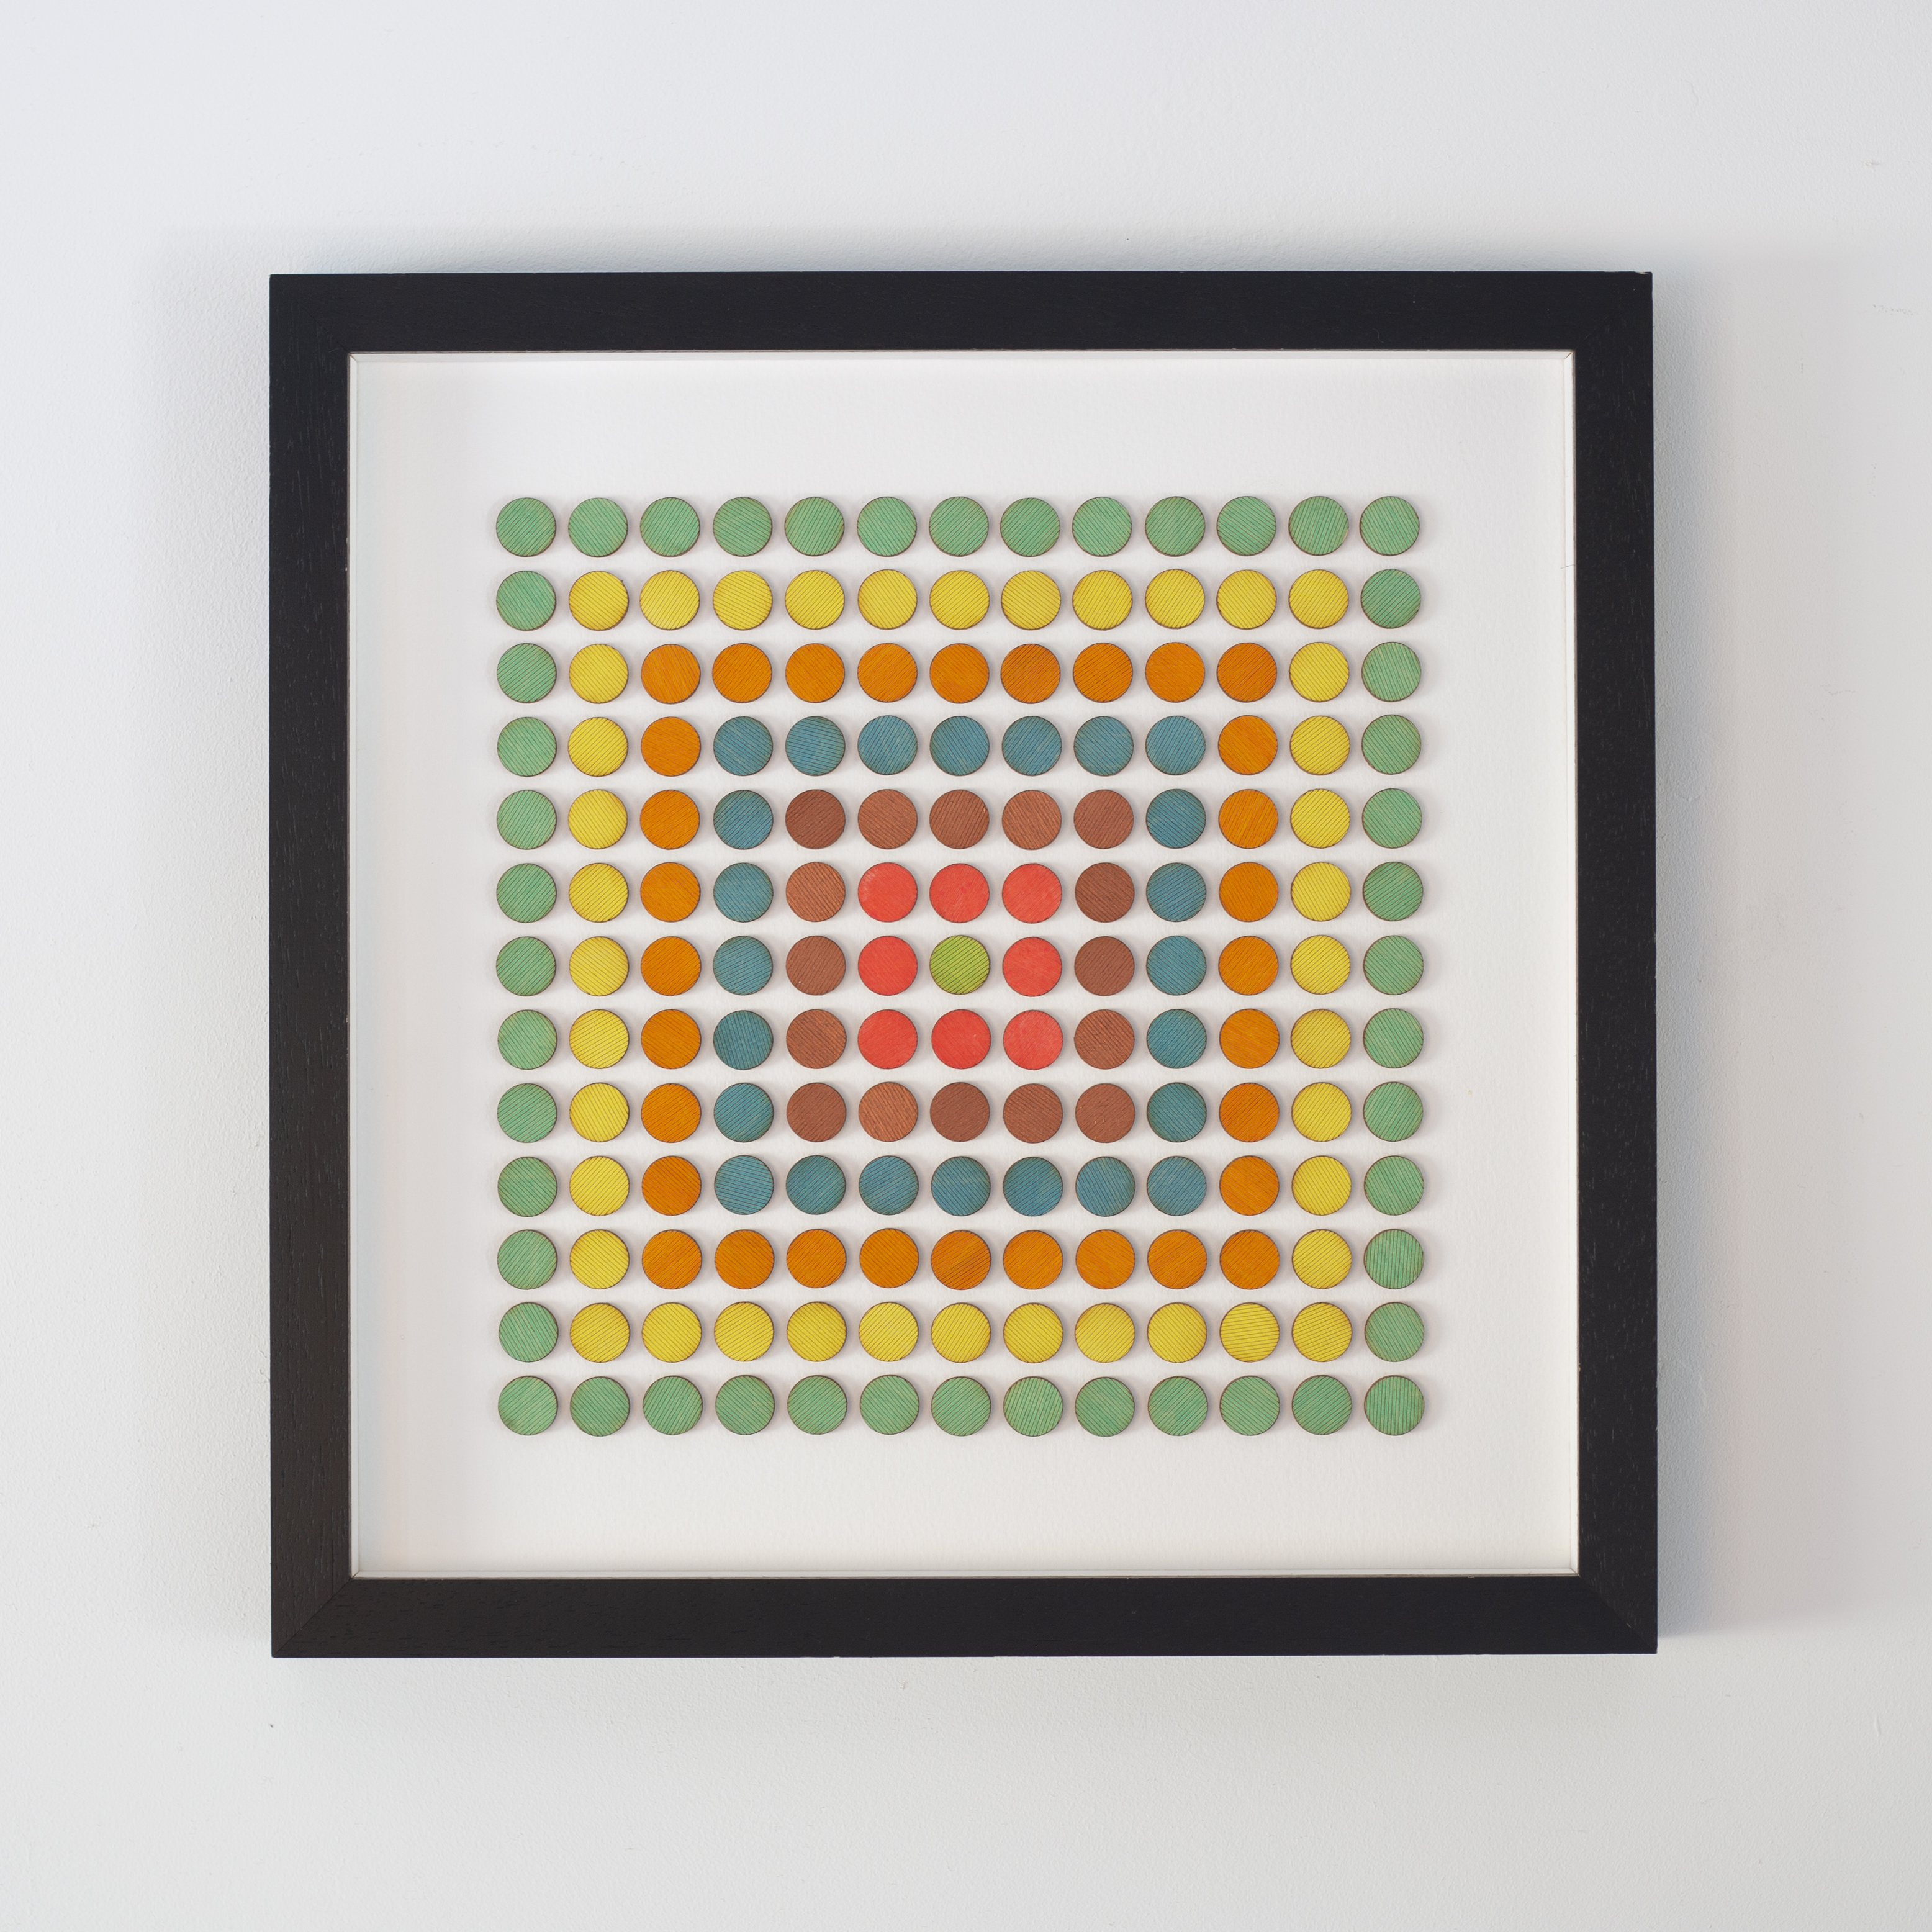 Amelia Coward, Concentric dots yellow, The Auction Collective